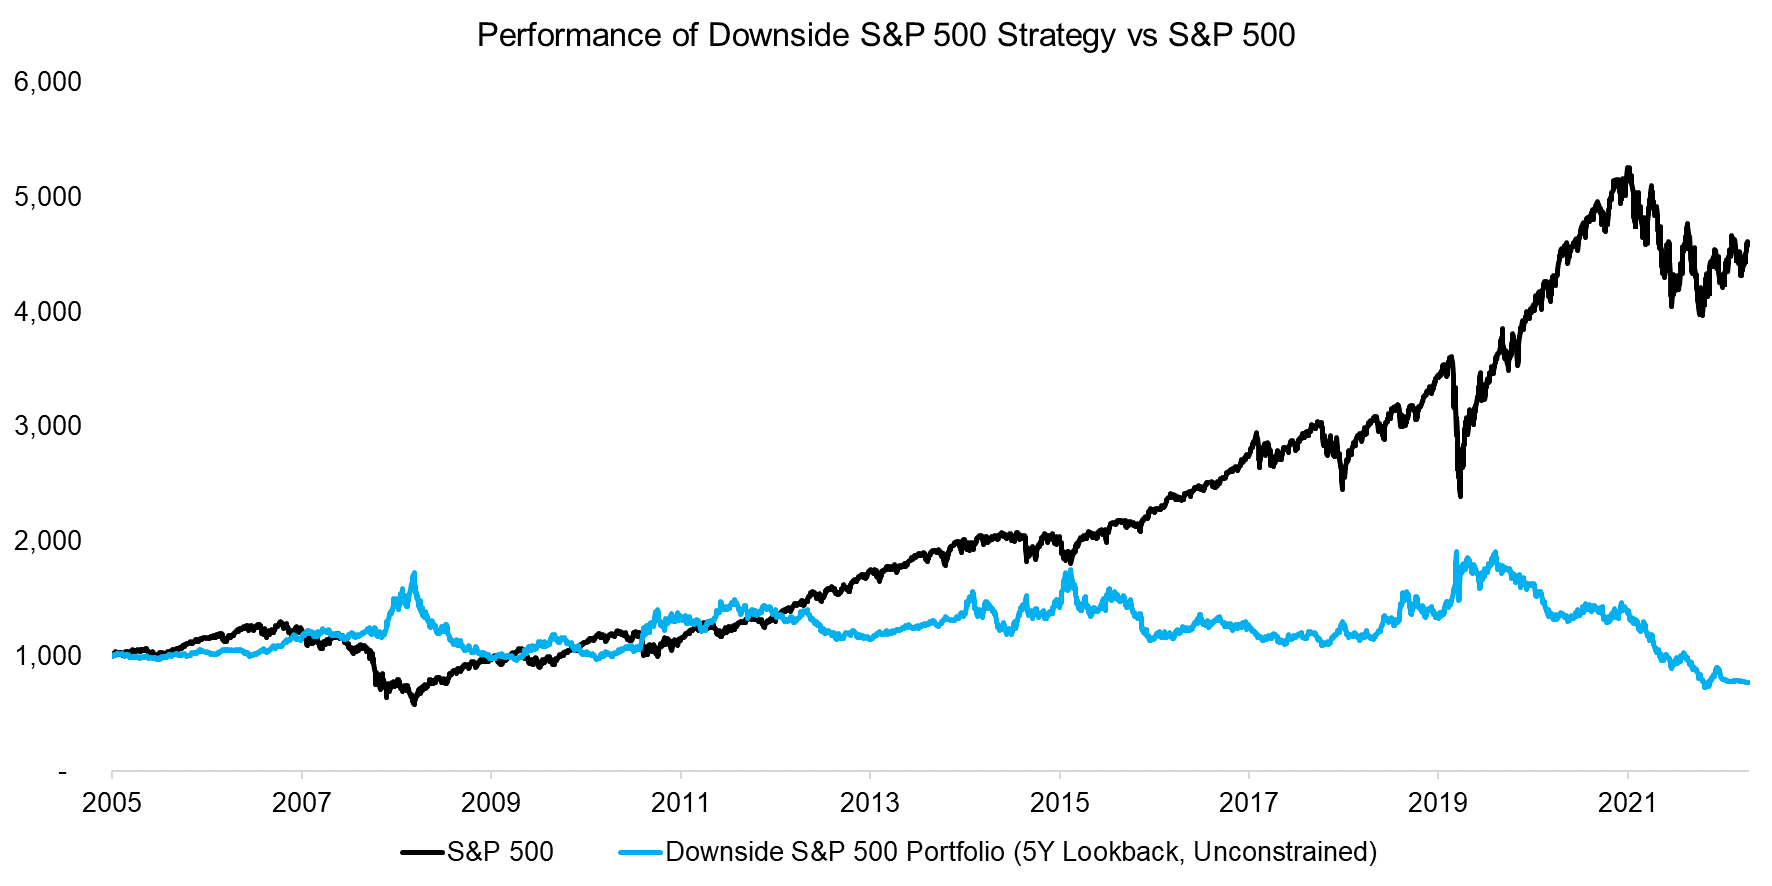 Performance of Downside S&P 500 Strategy vs S&P 500